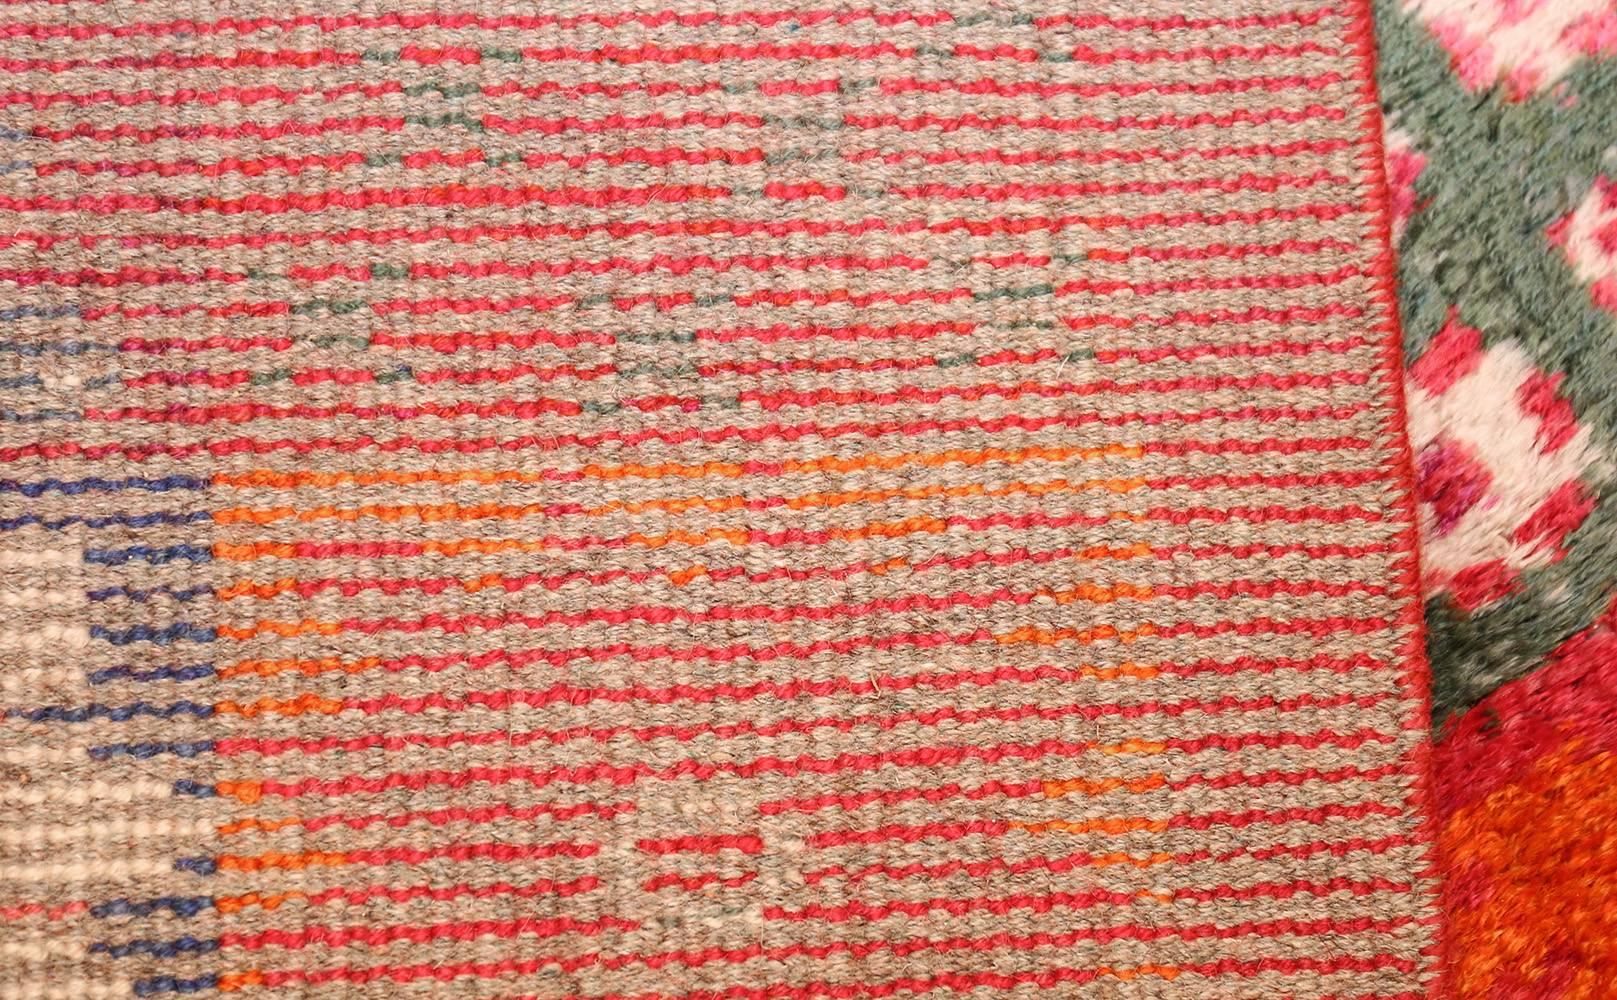 Wool Vintage Rya Rug by Marianne Richter for Marta Maas. Size: 4 ft 6 in x 5 ft 8 in